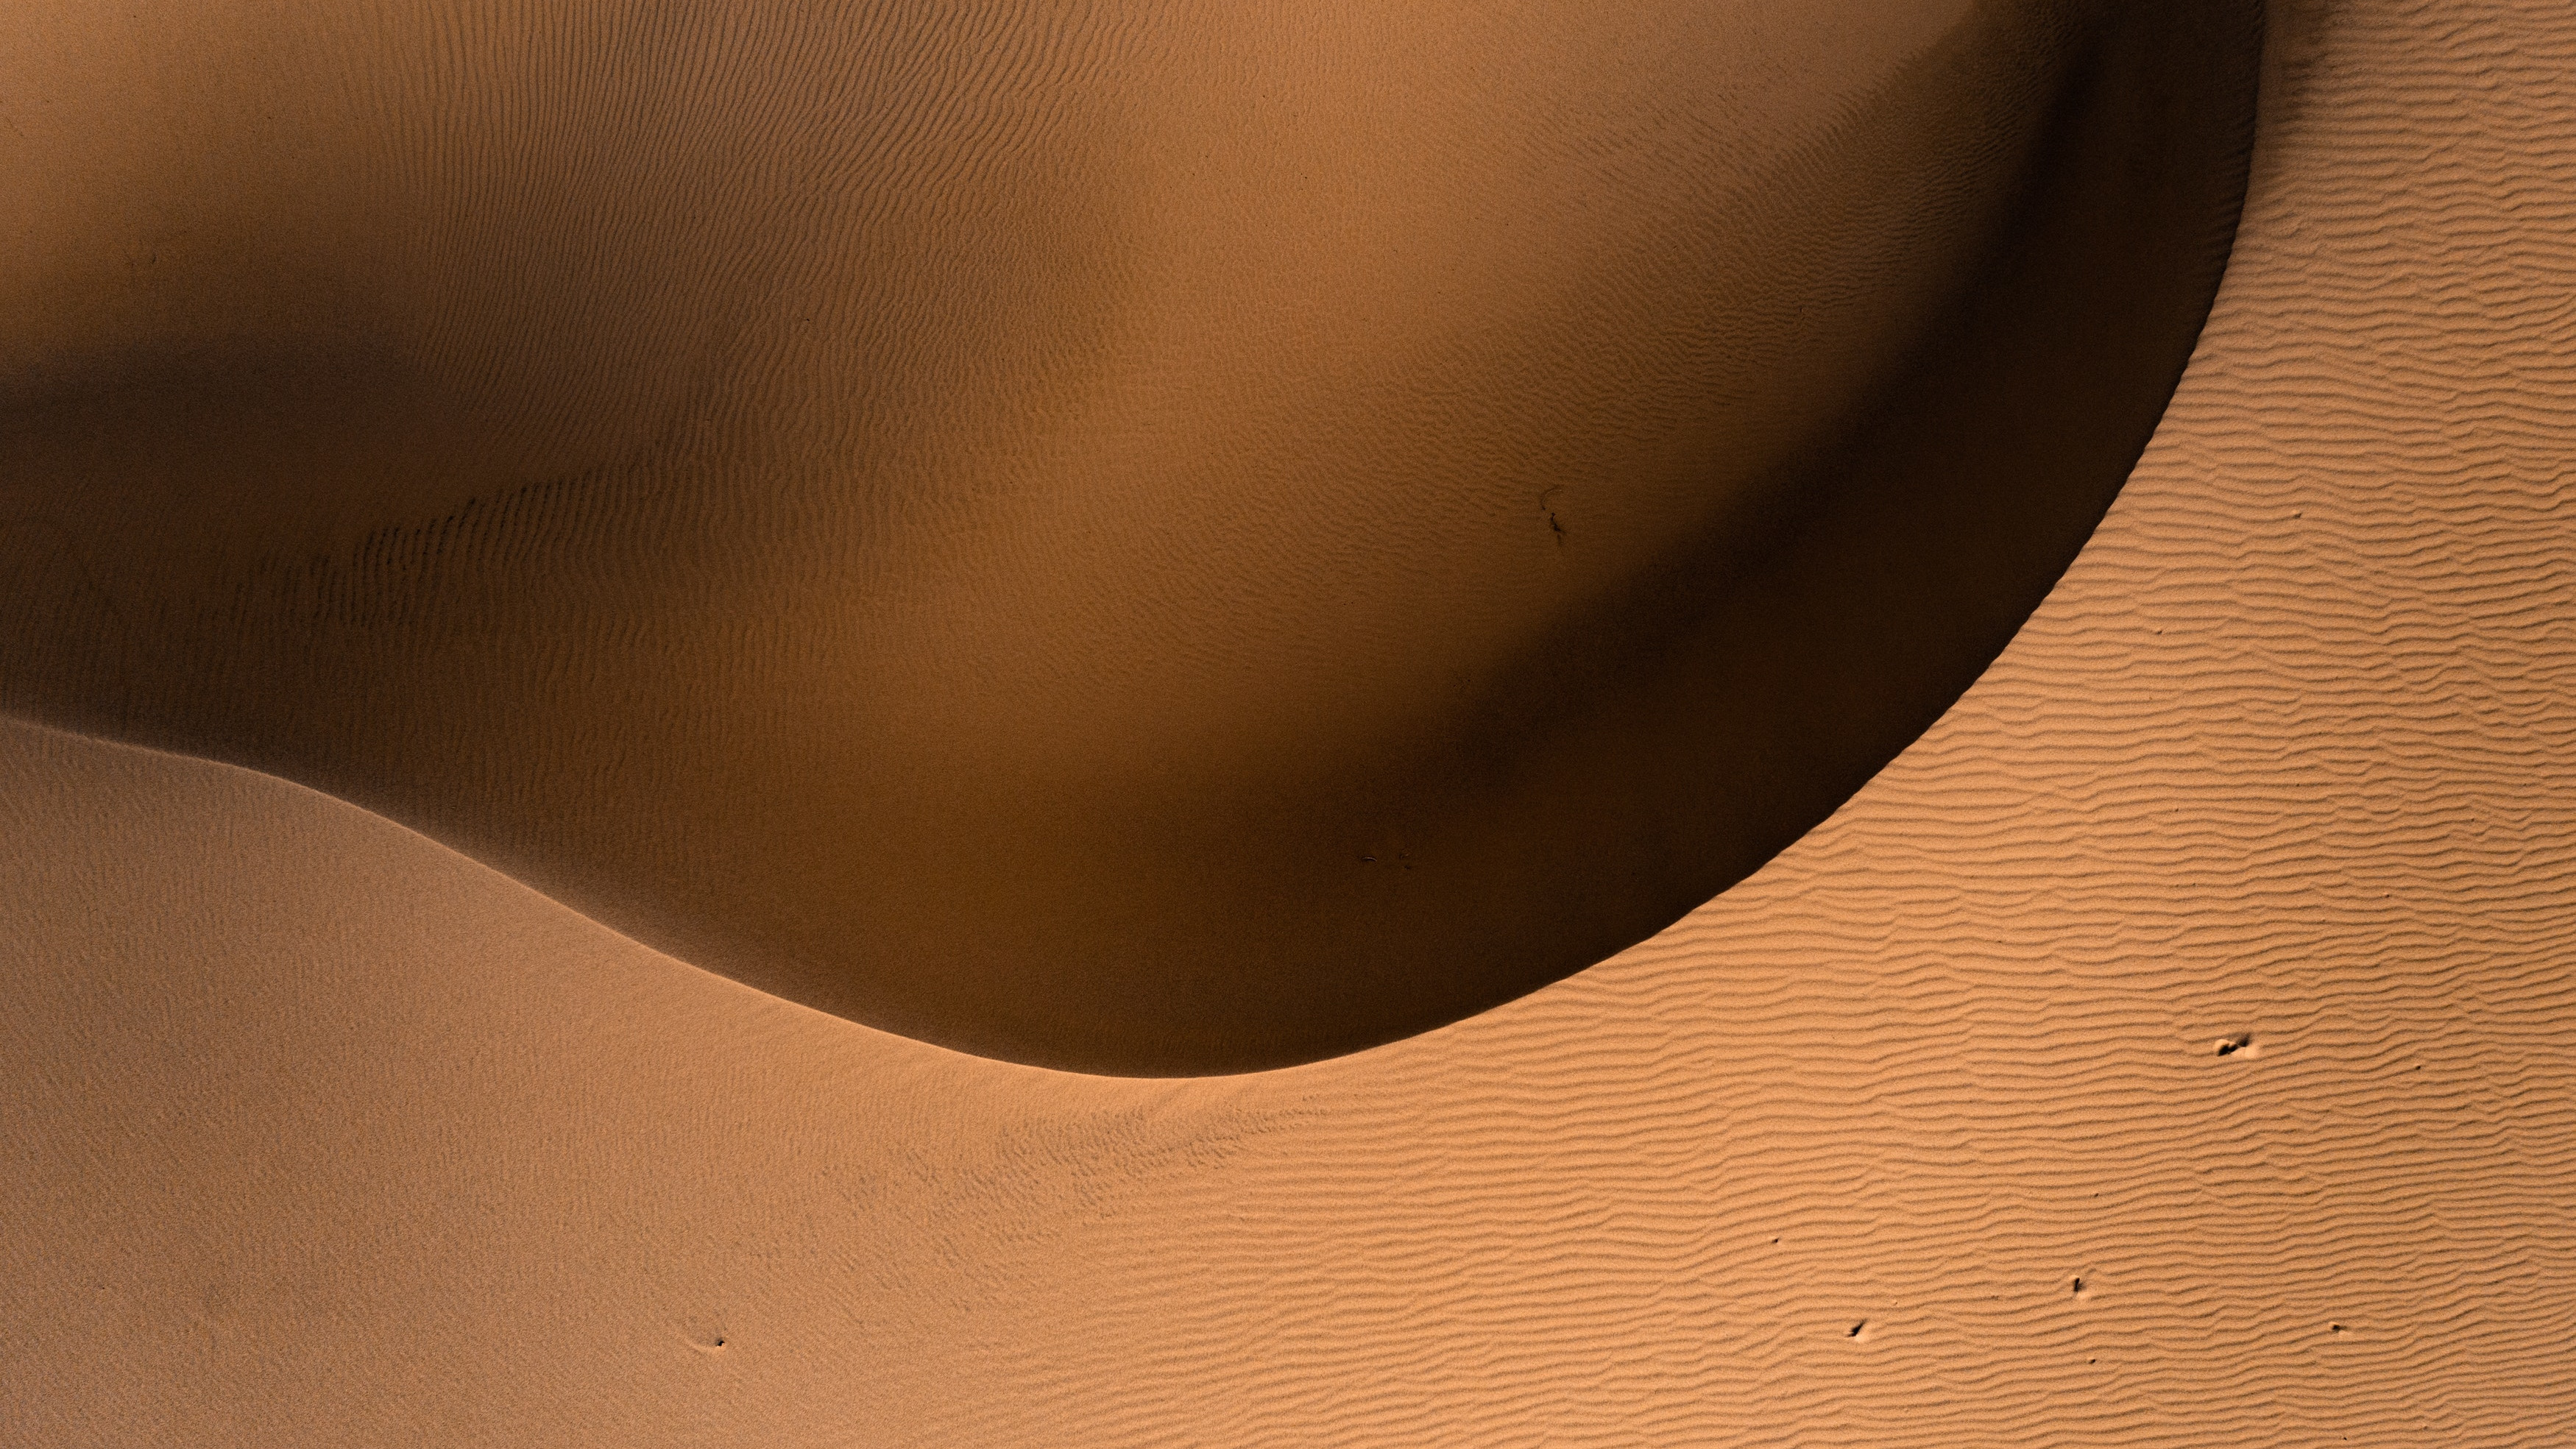 Aerial Shot of the Desert Smooth Sand in Guadalupe, California, USA by Jeremy Bishop